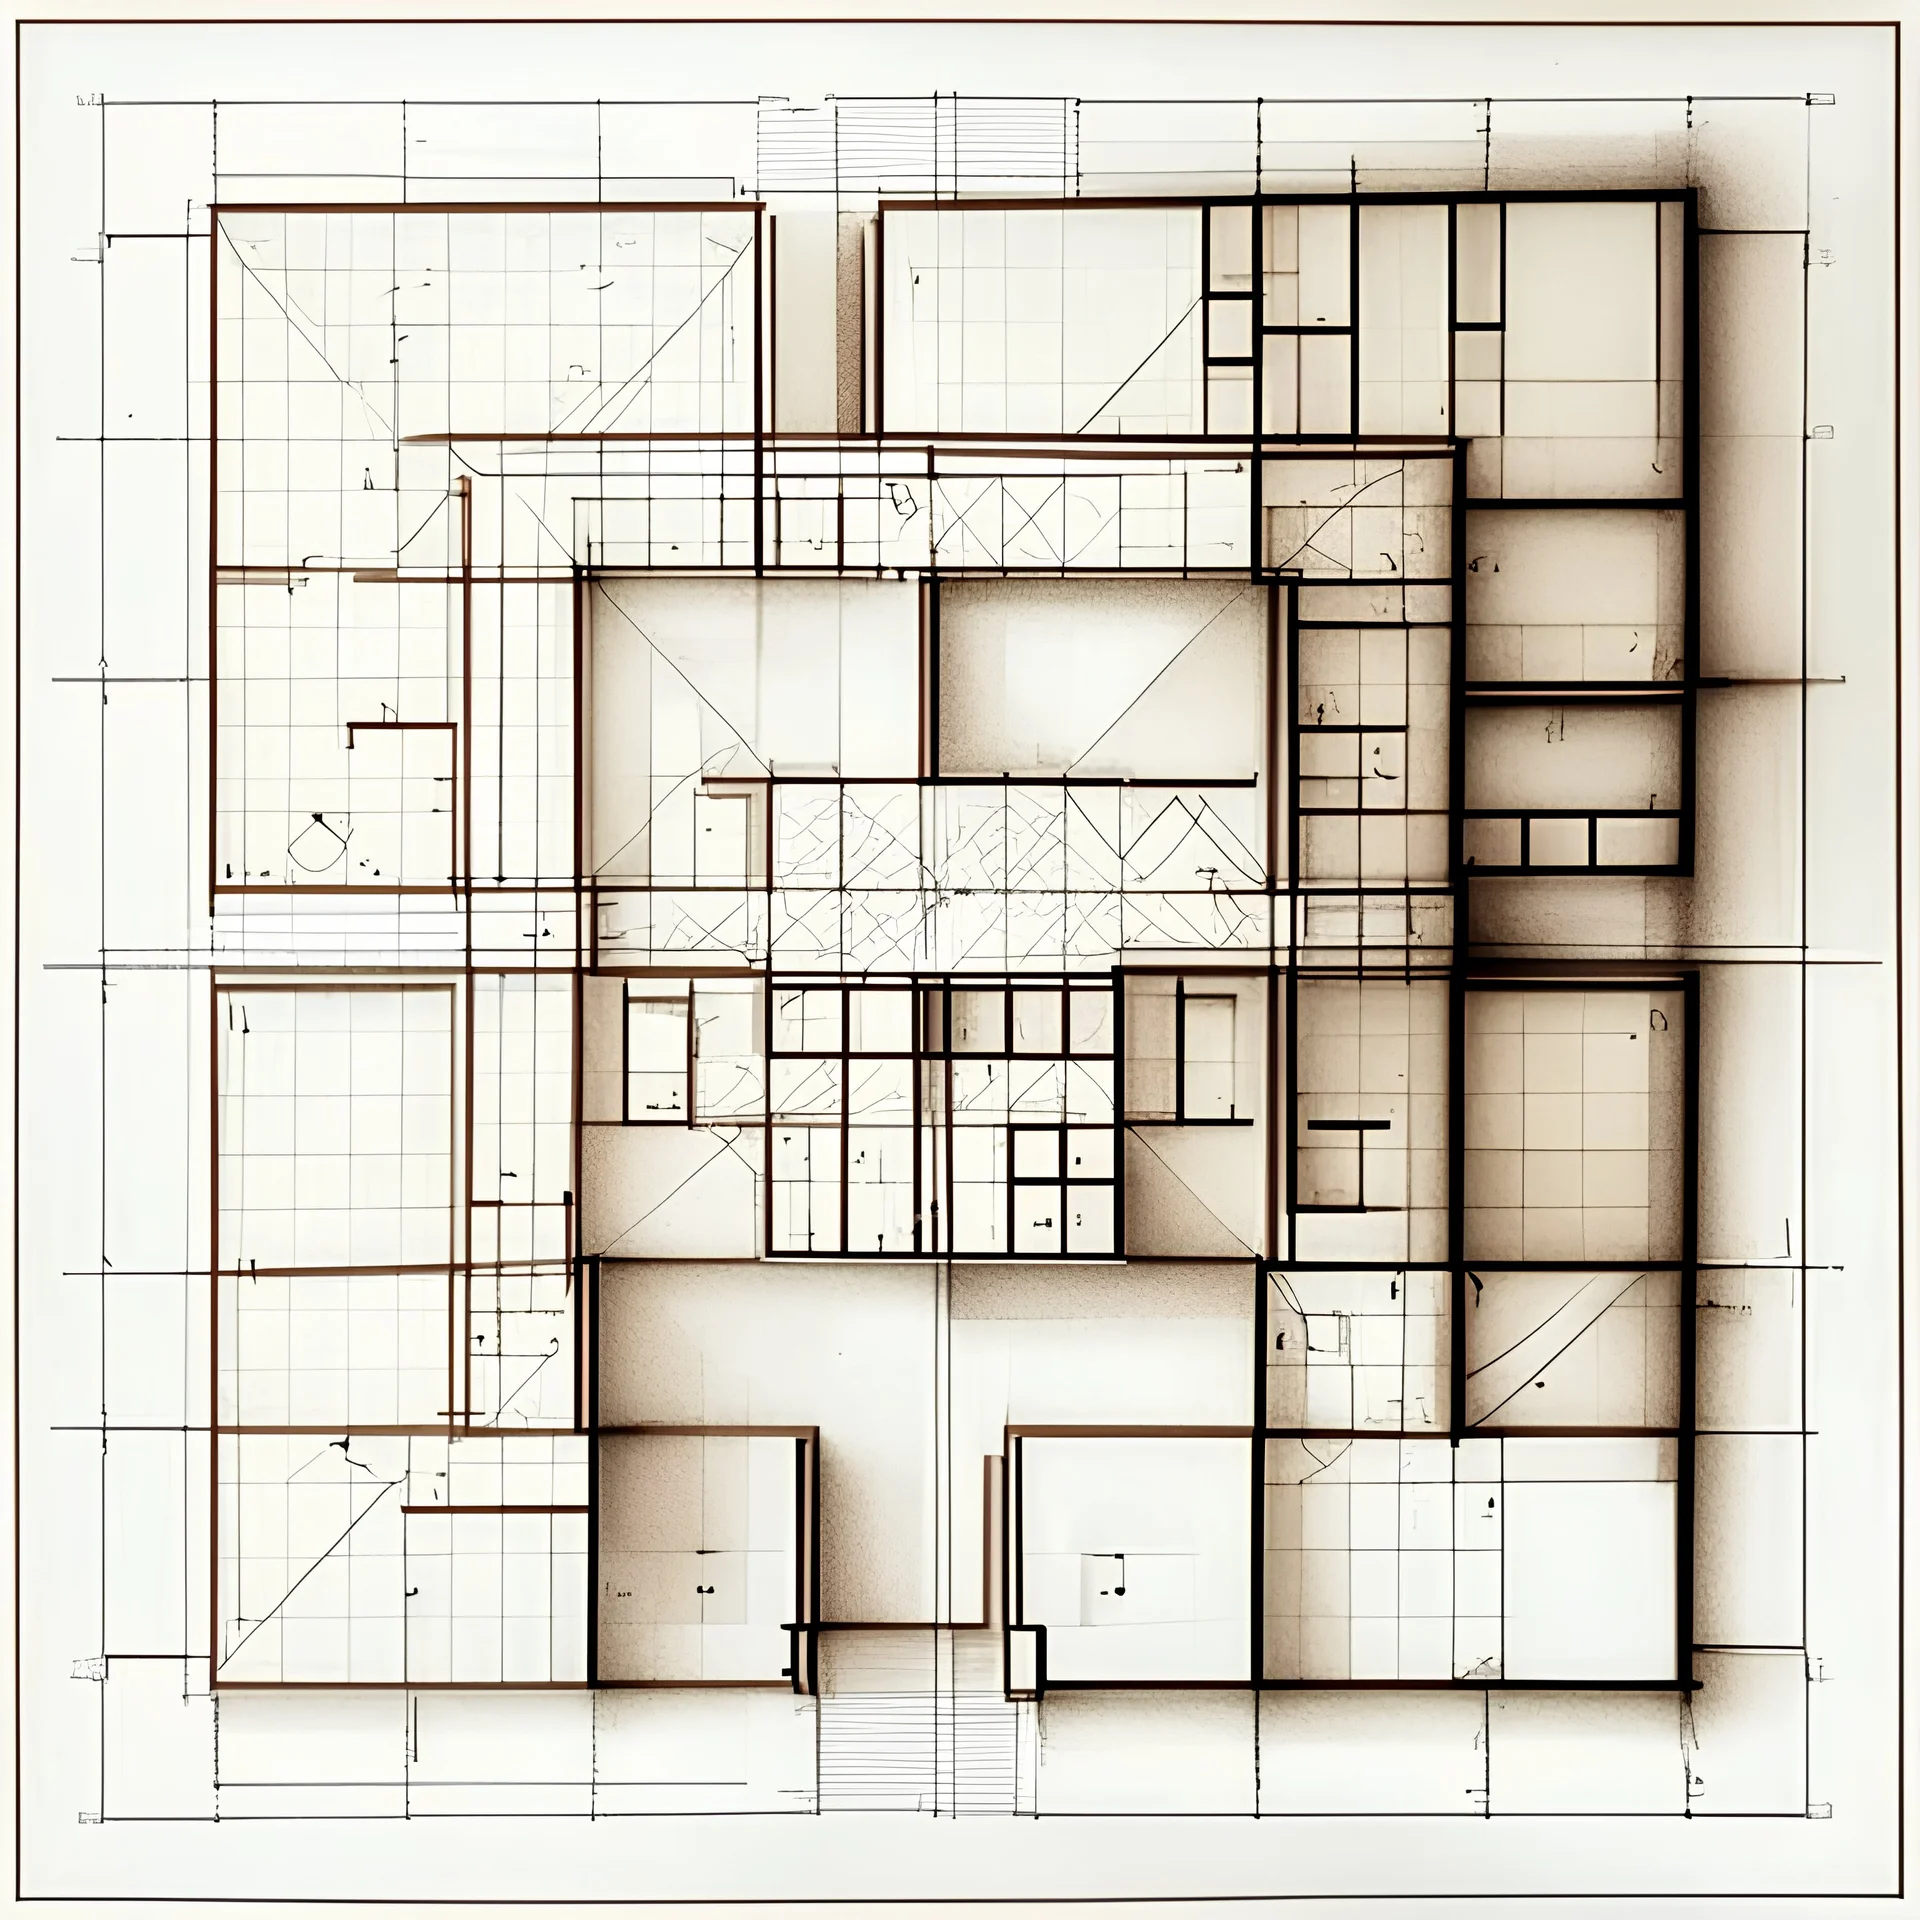 plan of the building for 50 squares, drawing with dimensional lines, signatures of rooms and squares